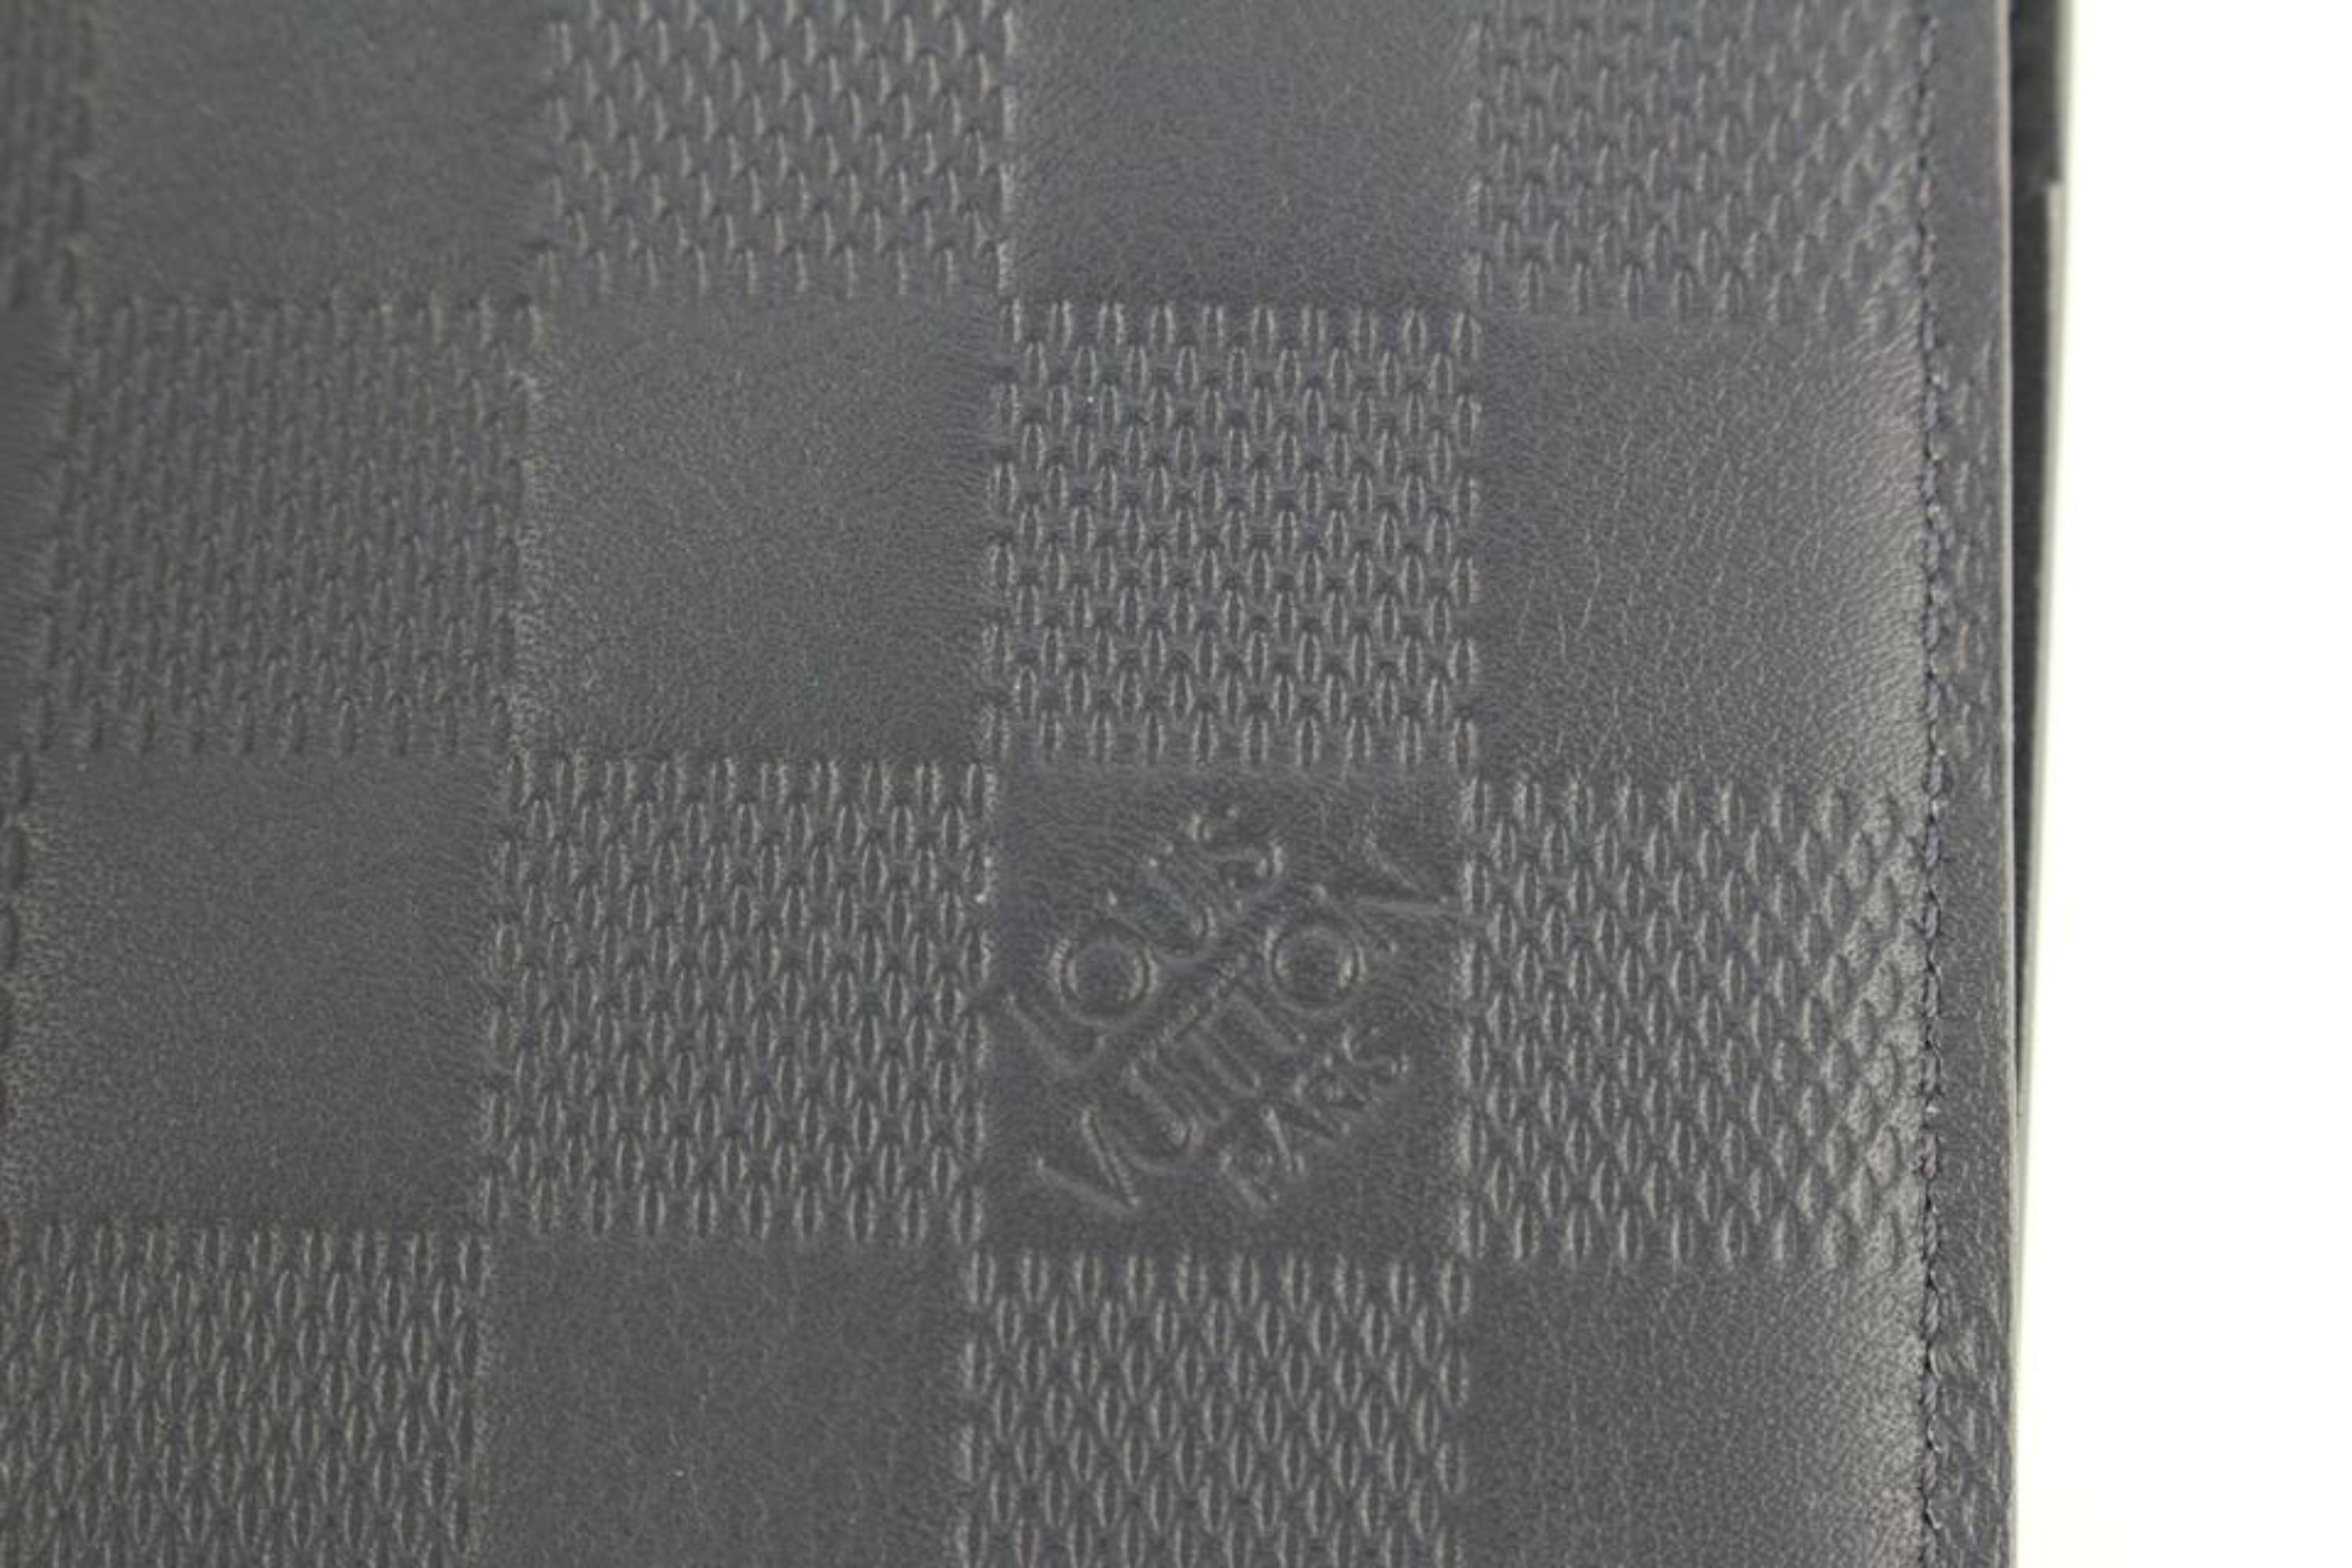 Barely Used Men's Louis Vuitton Wallet for Sale in Portland, OR